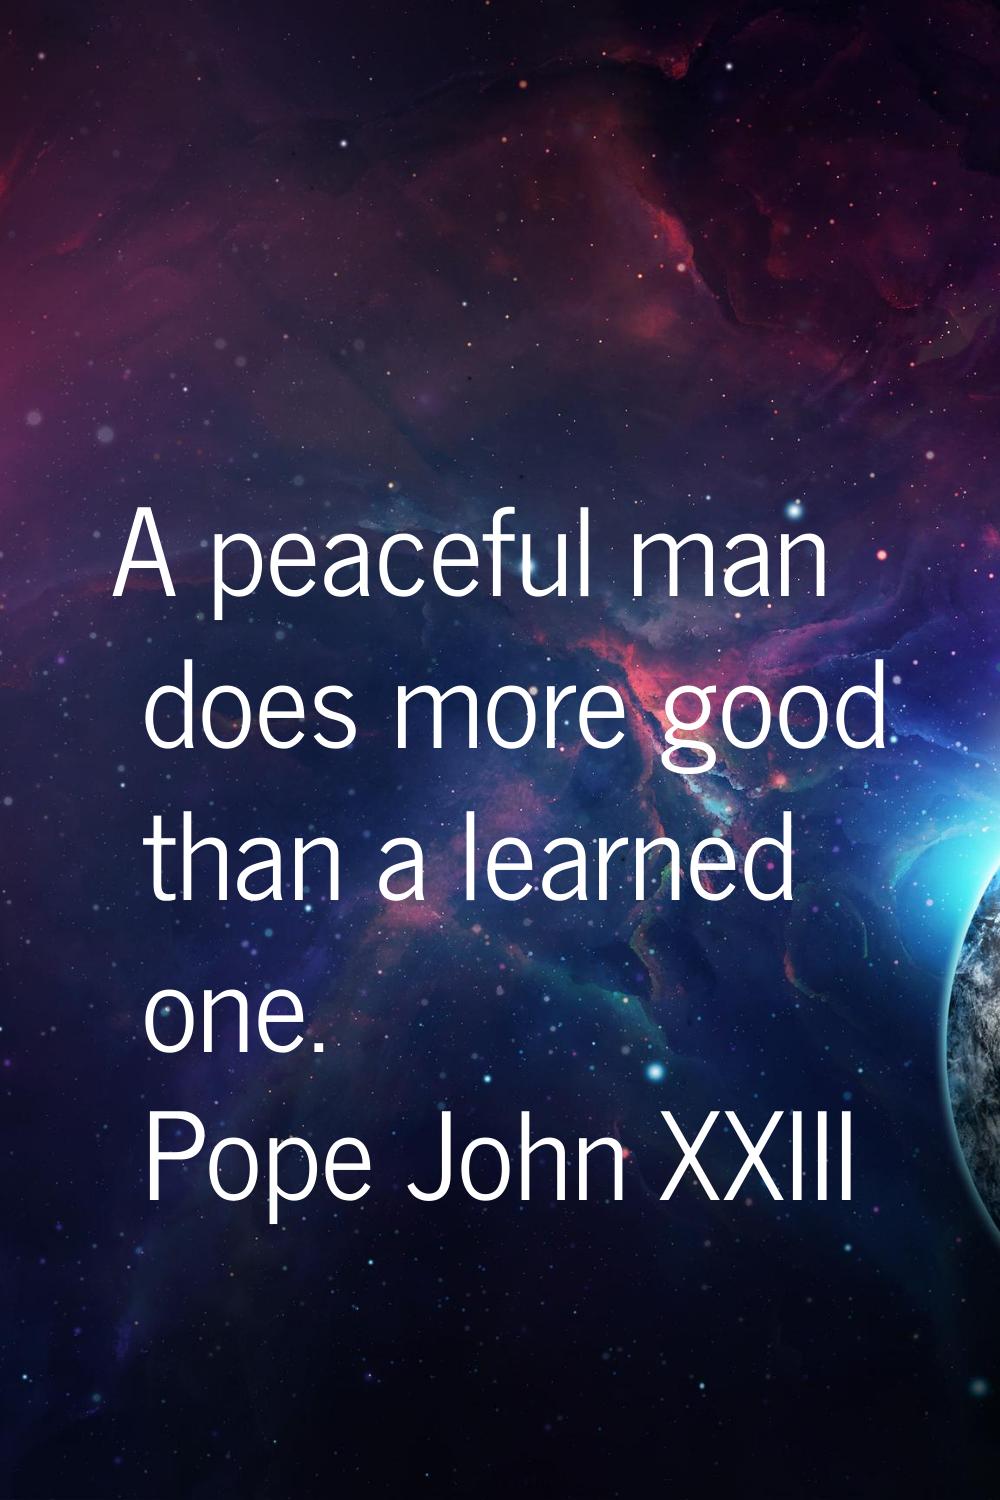 A peaceful man does more good than a learned one.